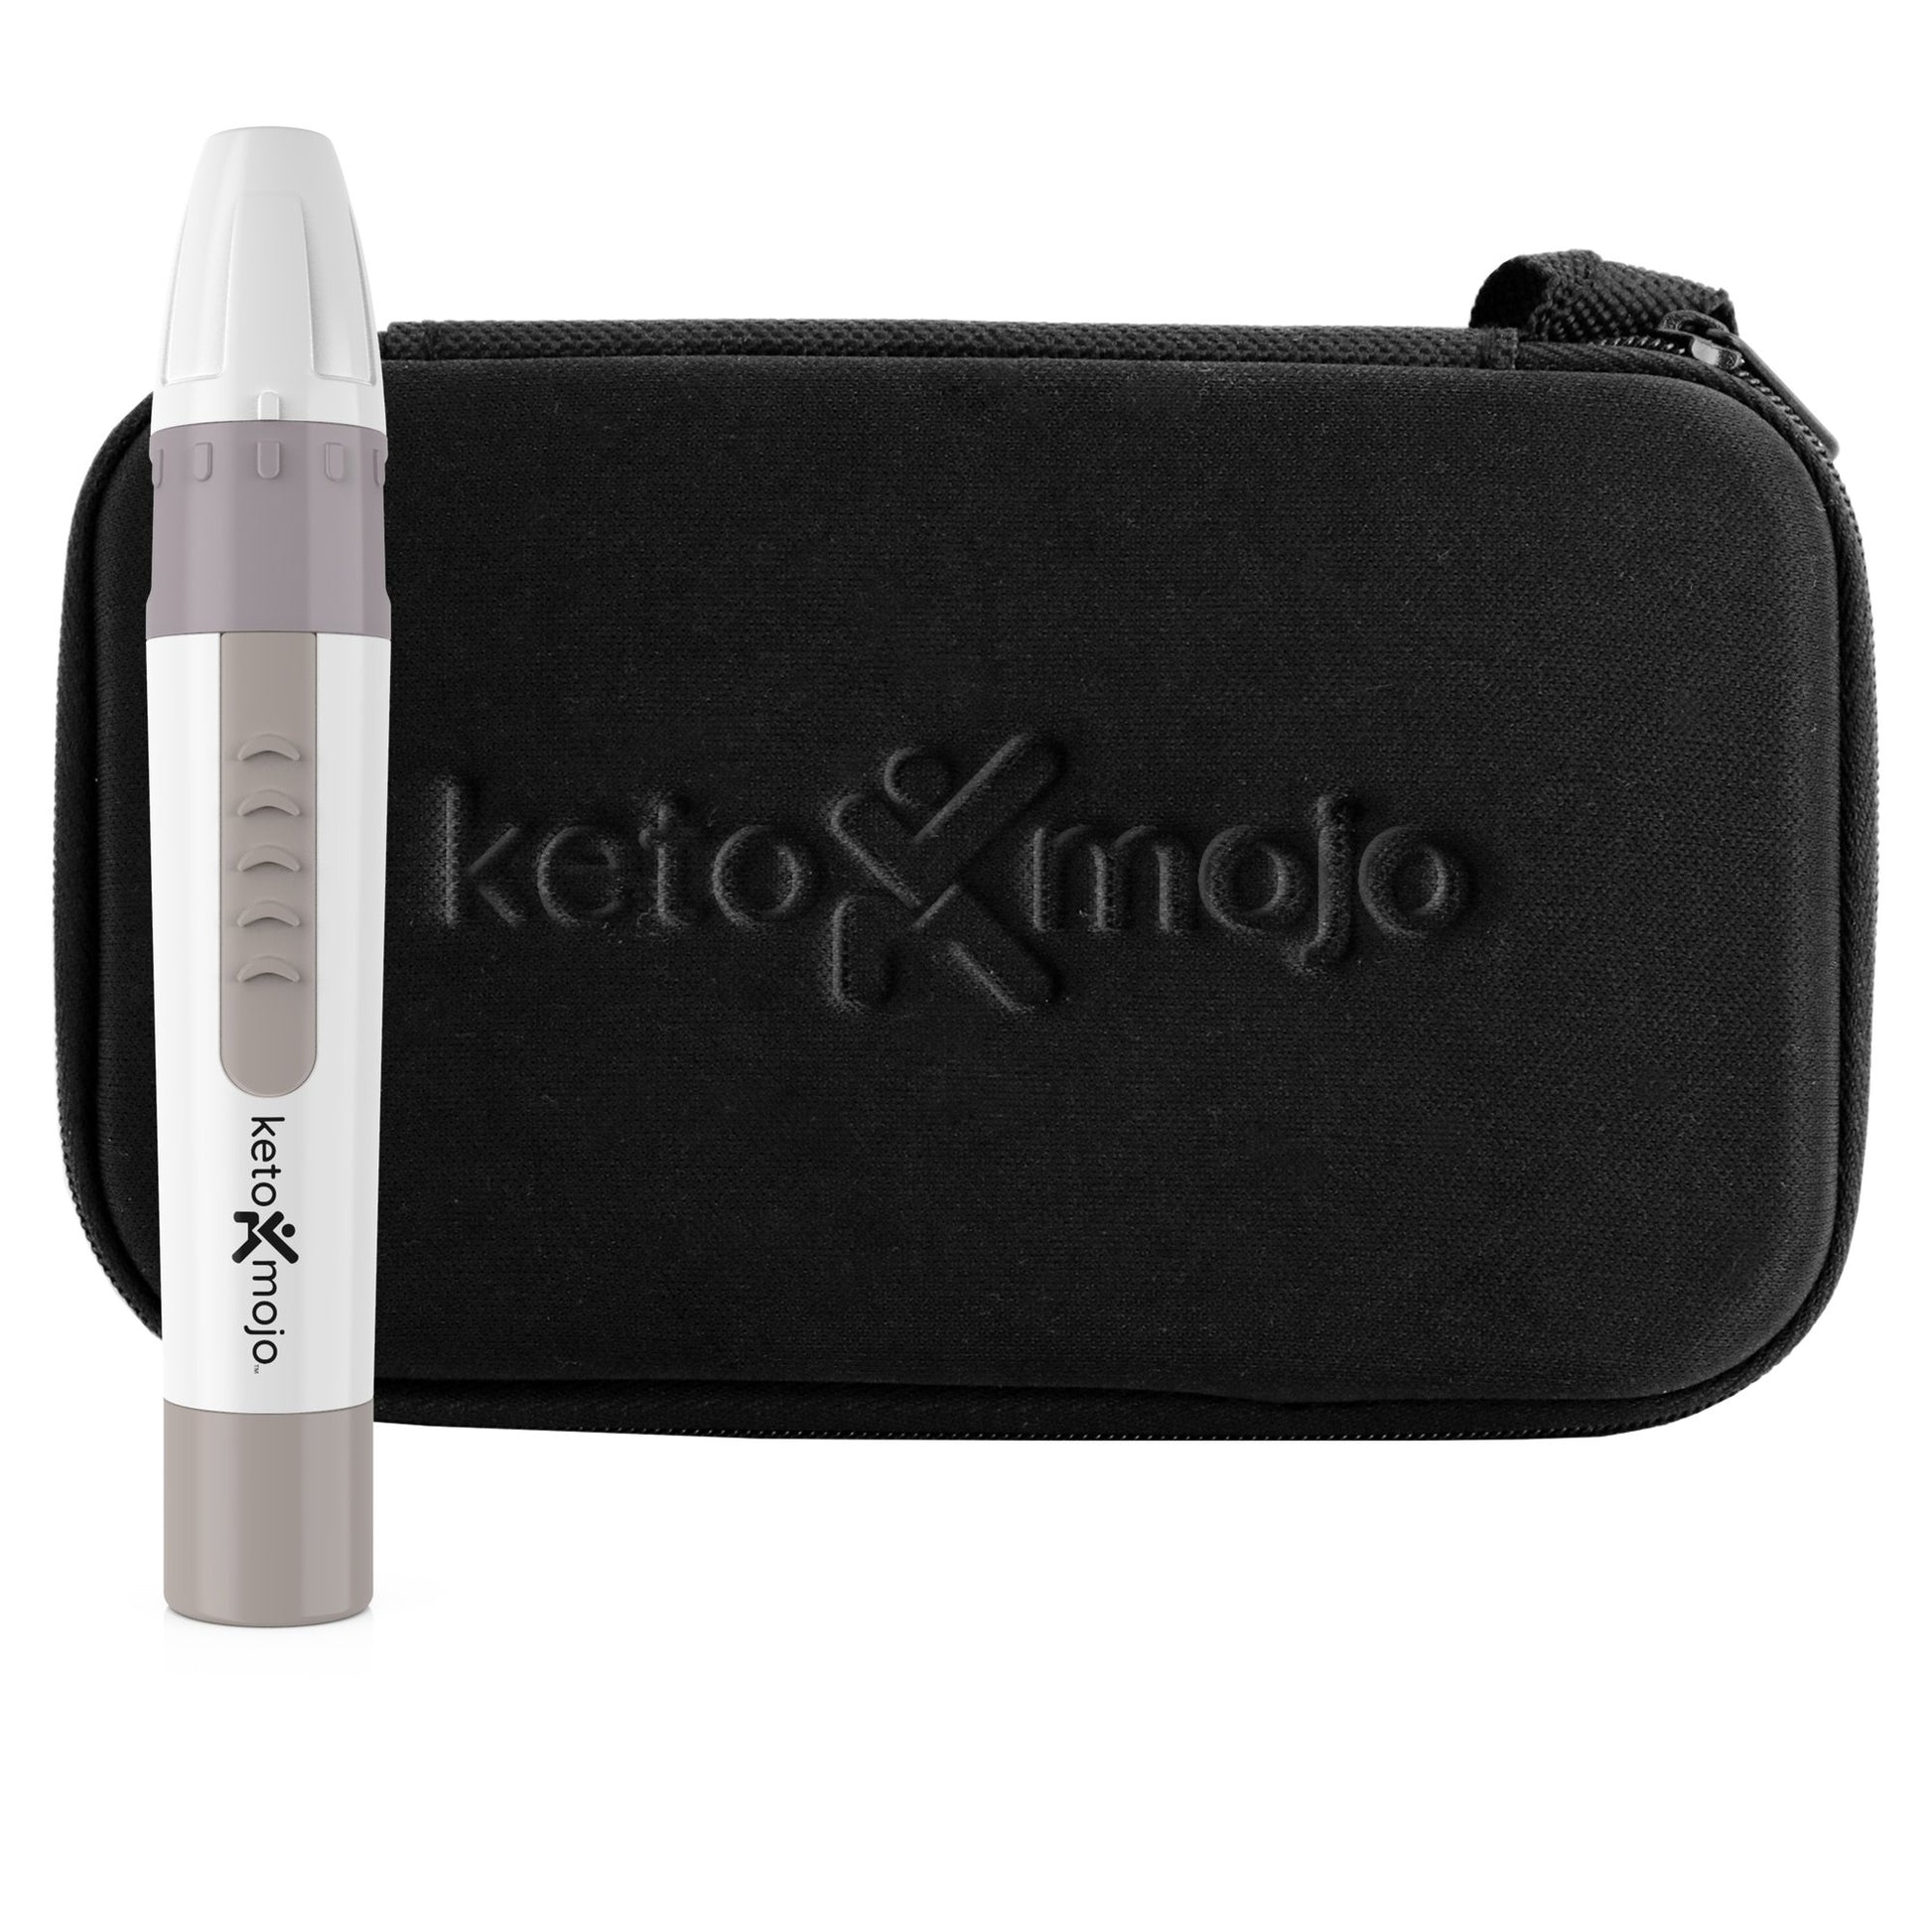 The Keto-Mojo Blood Ketone and Glucose meter comes with a high-quality accessory case and a lancet device.